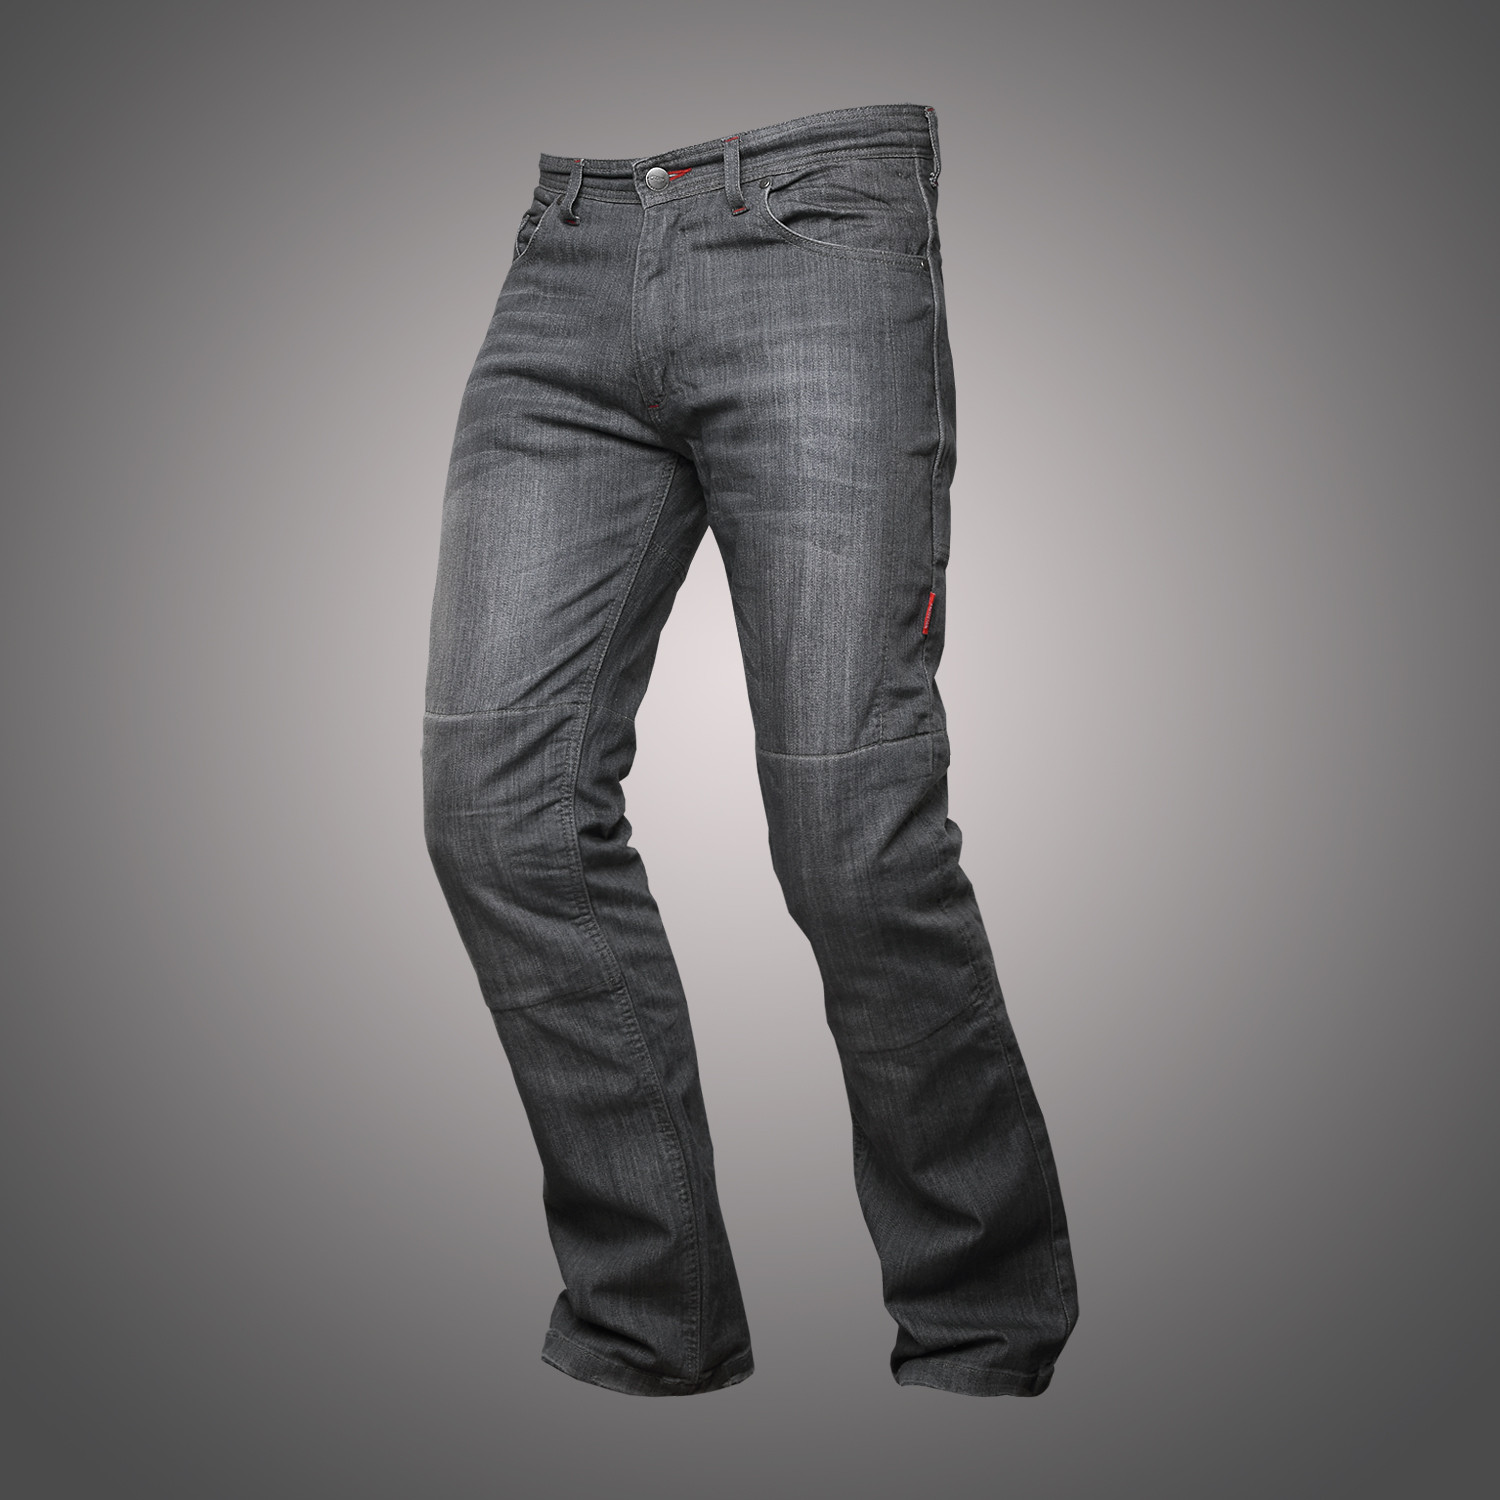 grey motorcycle jeans